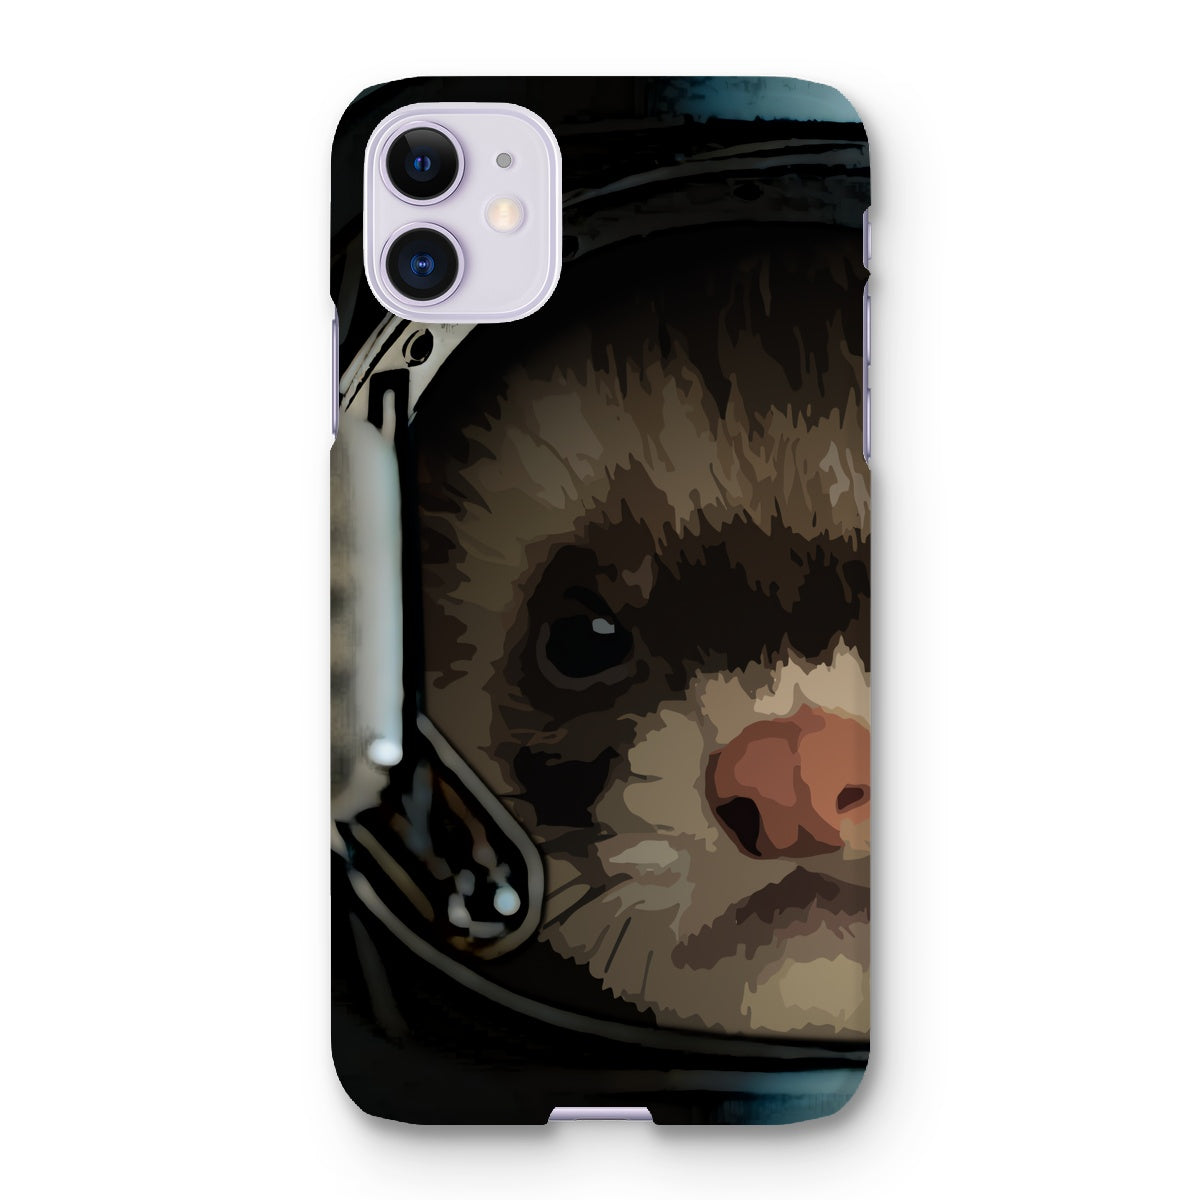 For All Ferretkind Snap Phone Case